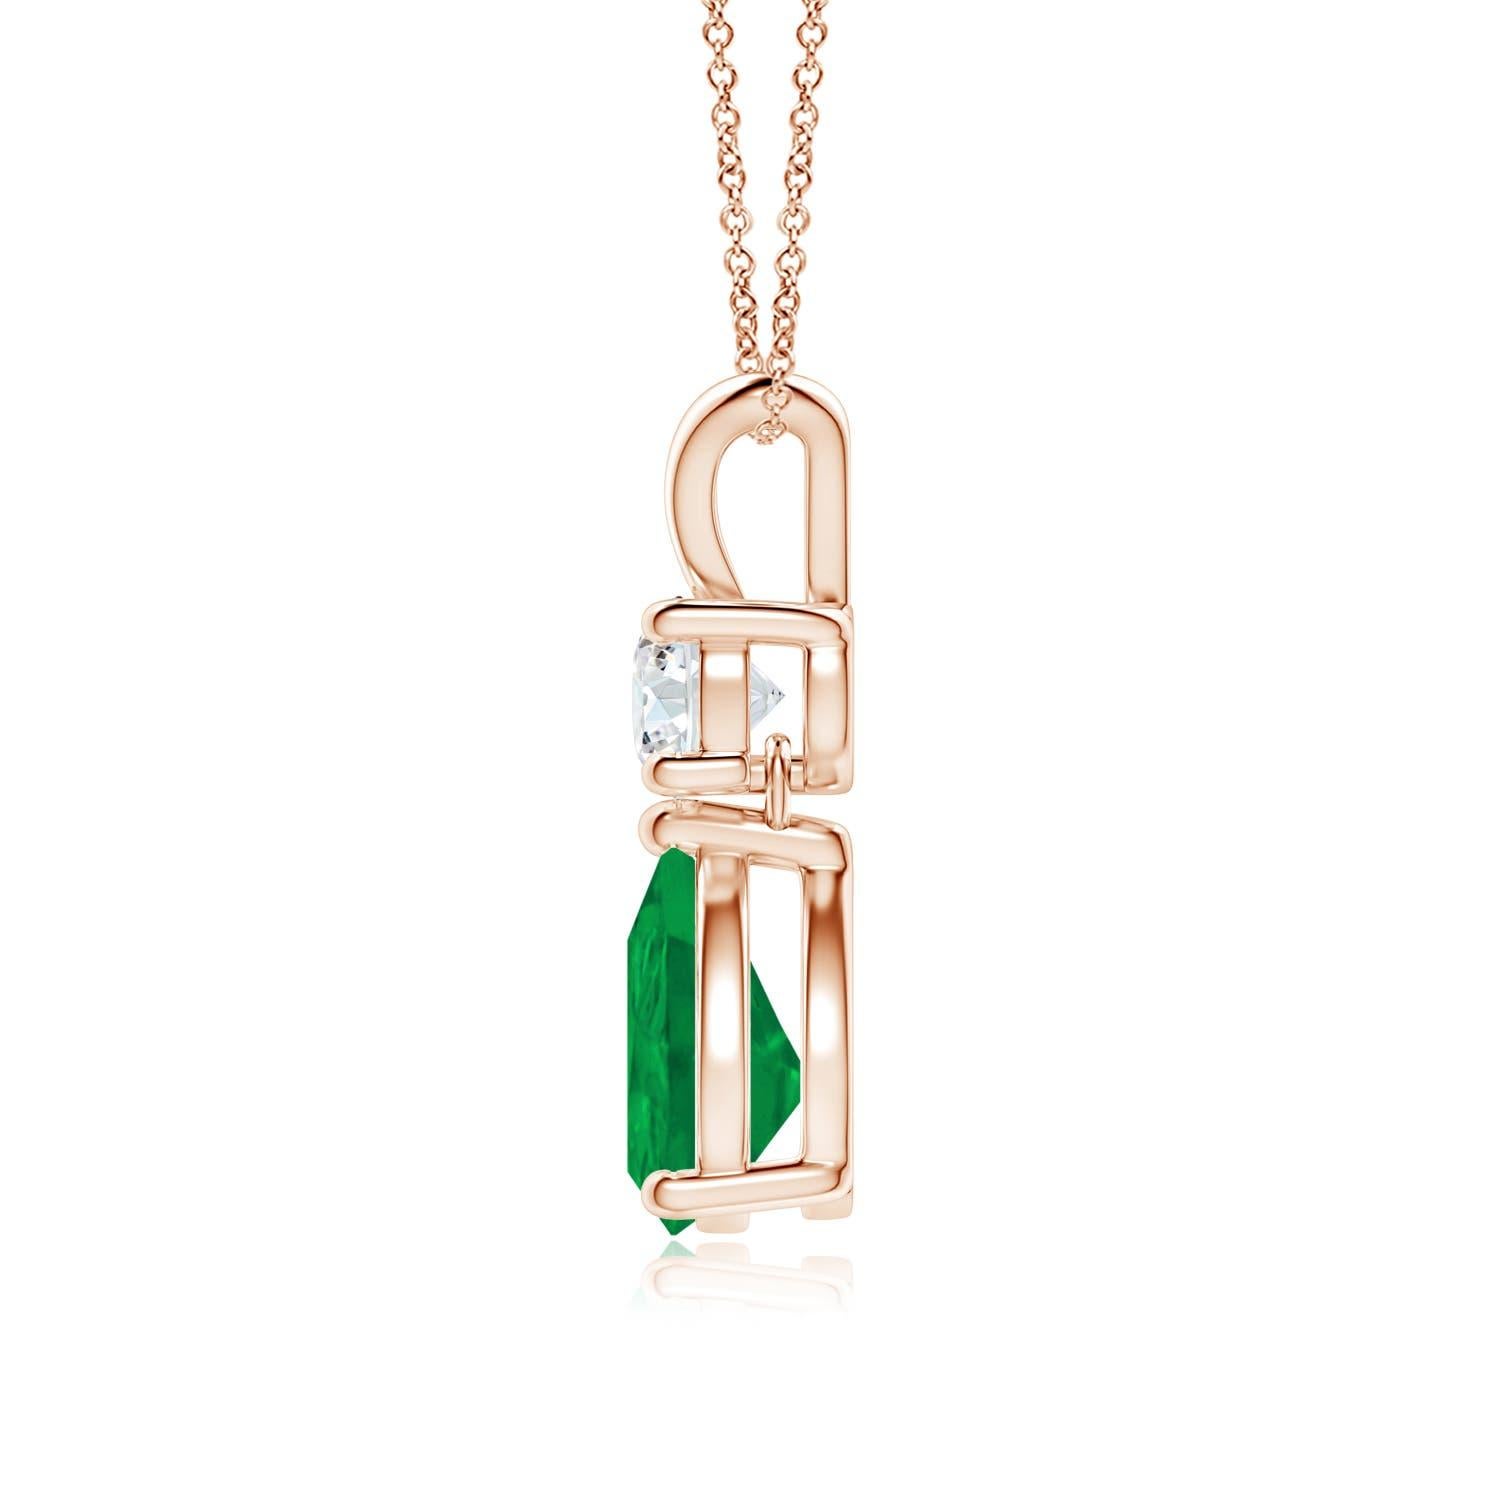 A vivid green pear cut emerald dangles from a sparkling white diamond on this elegant drop pendant. The lustrous V bale adds beauty to this 14k rose gold emerald and diamond pendant. It exudes luxurious charm with its remarkable long drop